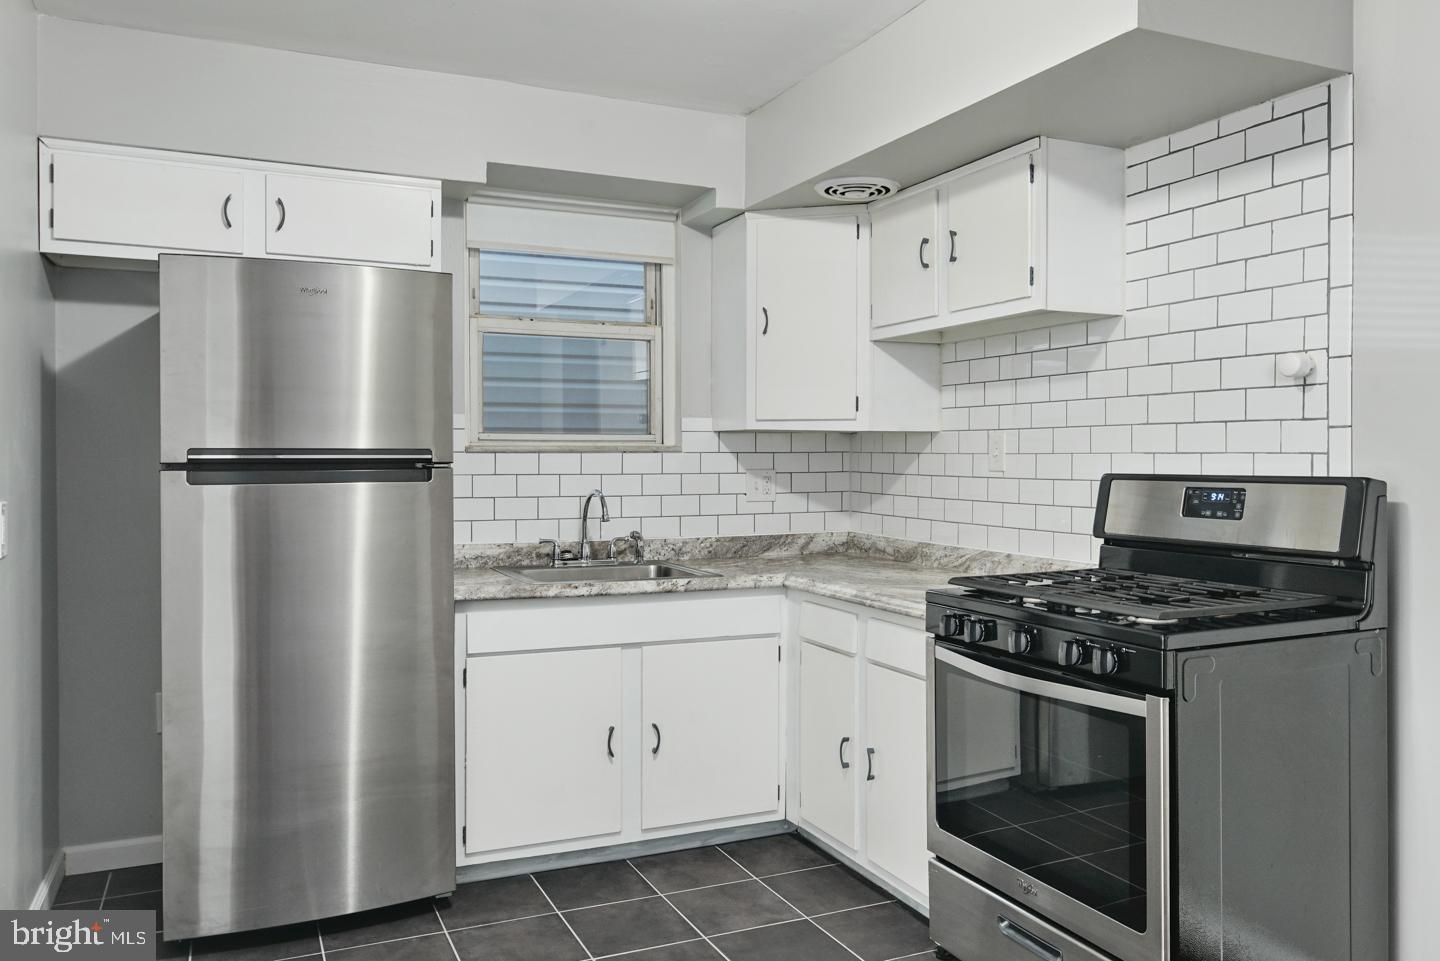 a kitchen with cabinets stainless steel appliances and sink